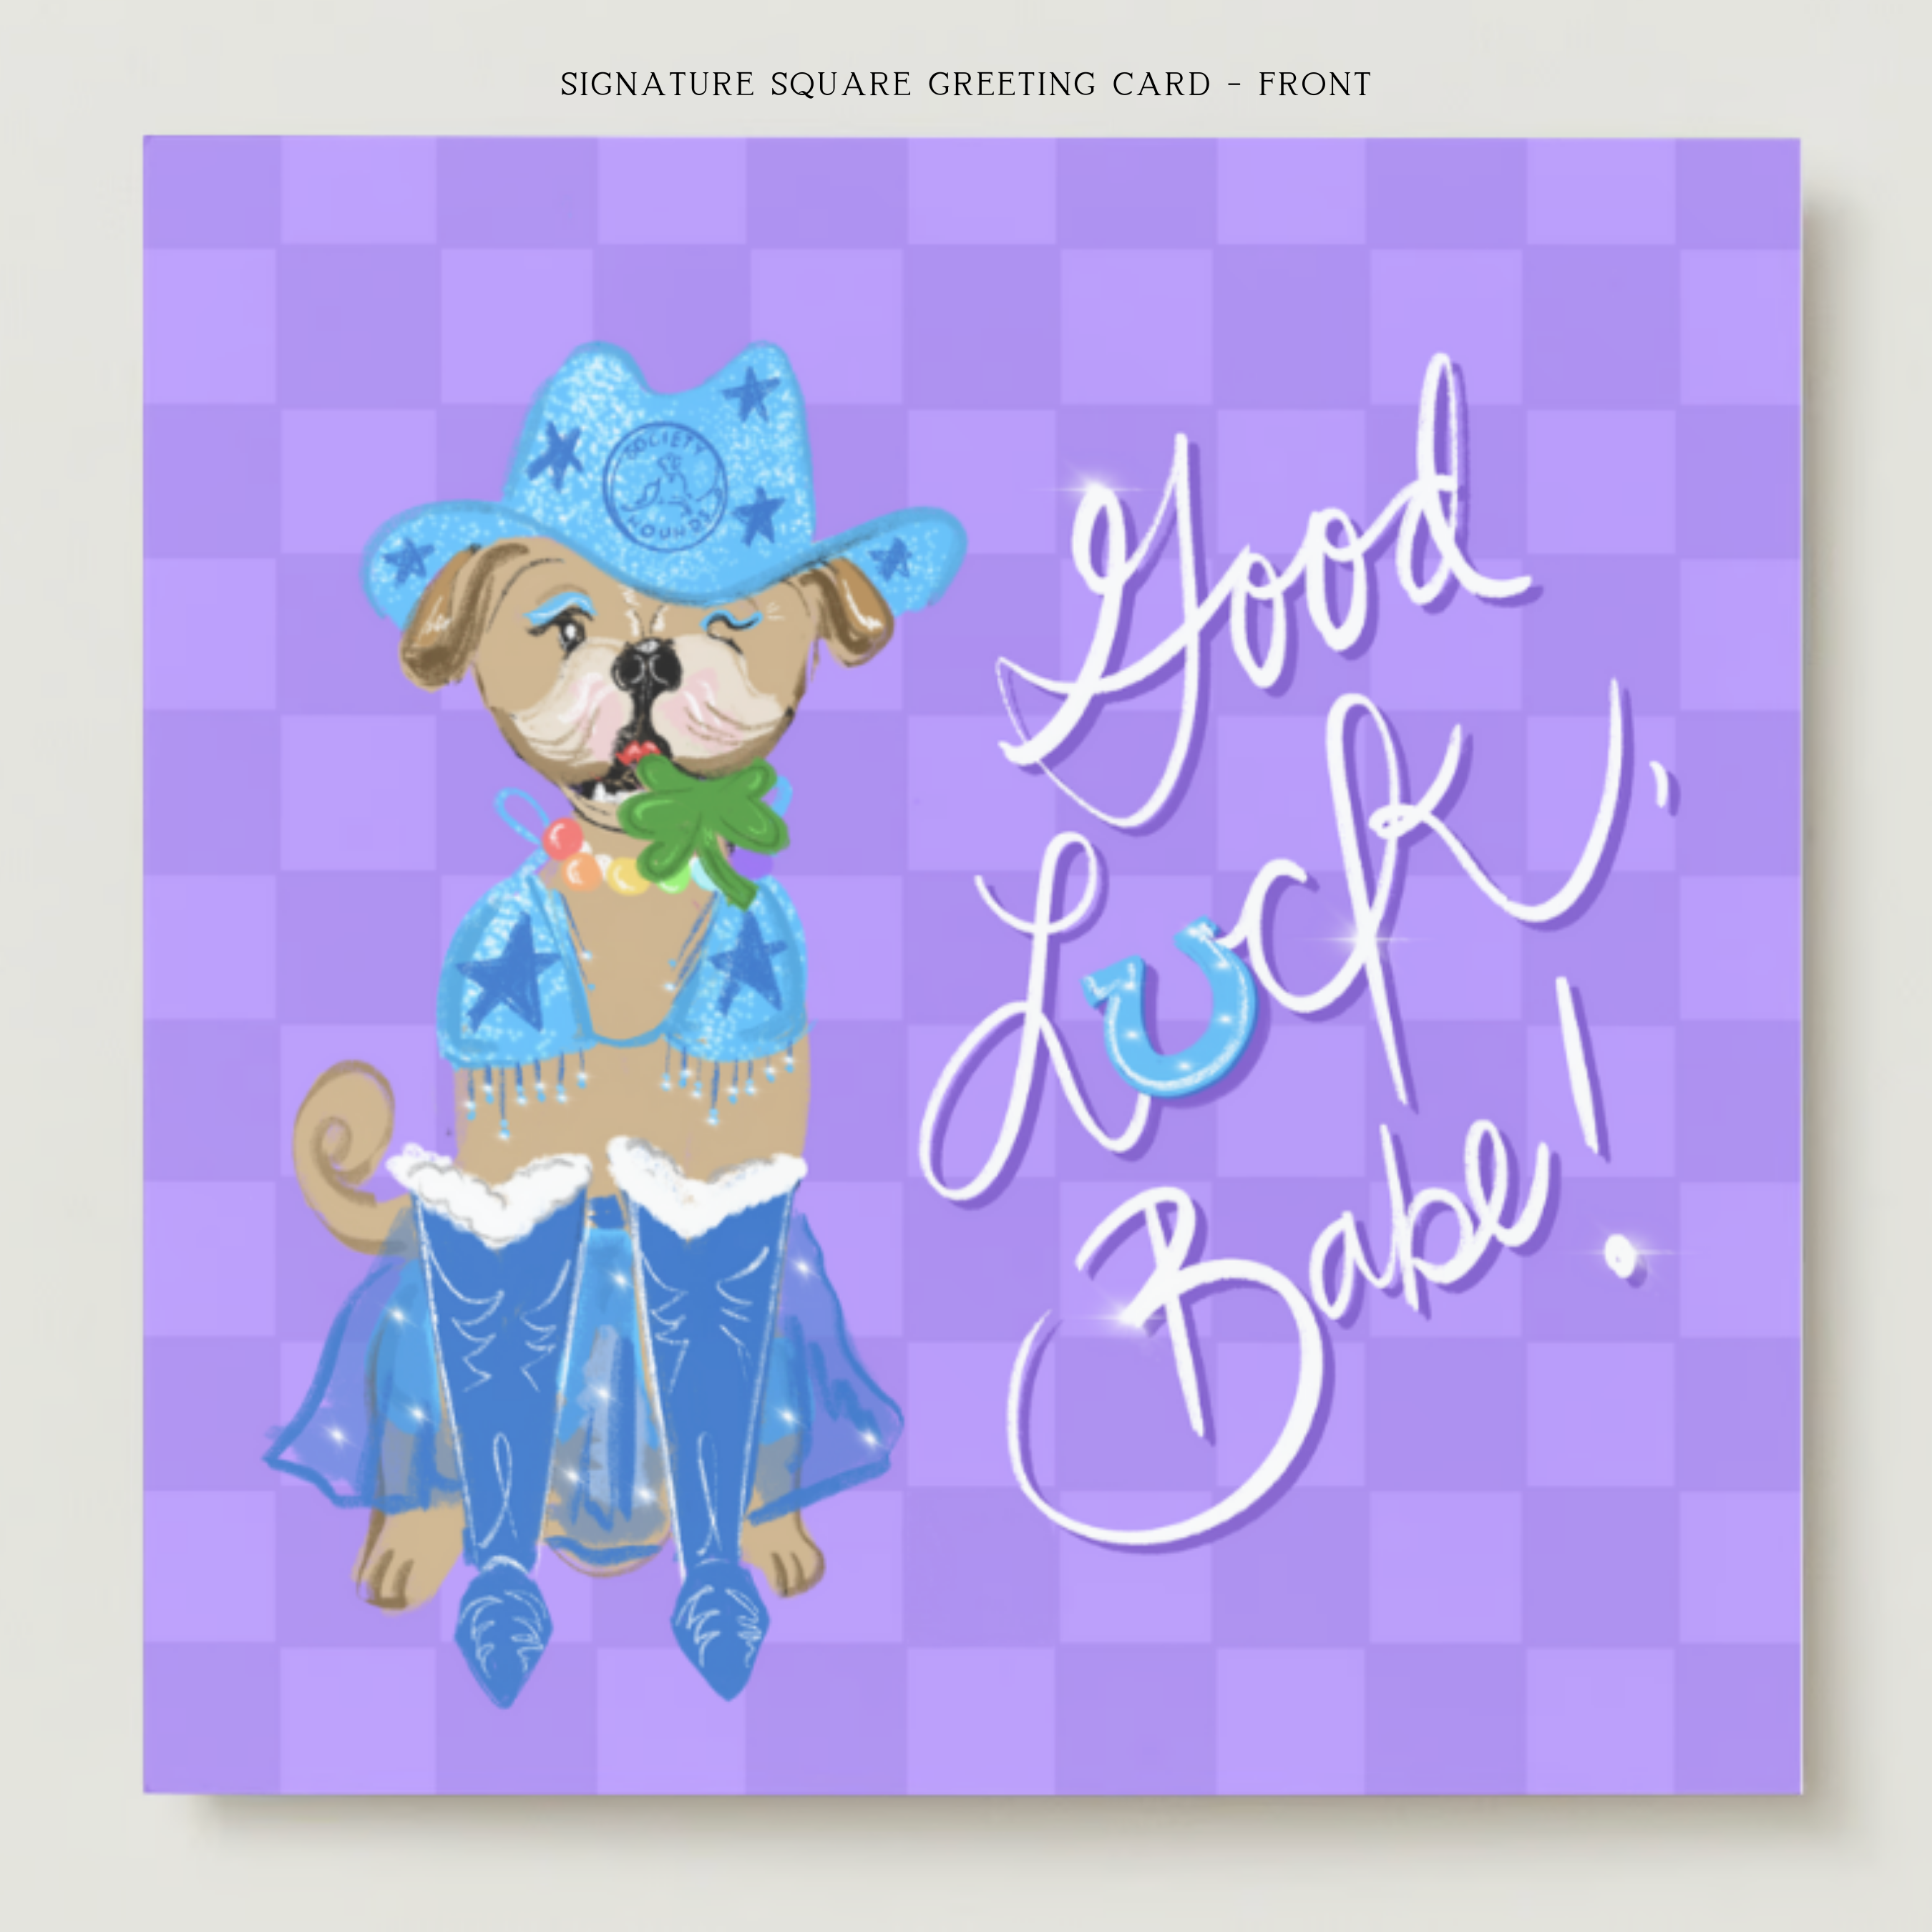 Good Luck, Babe Greeting Card!